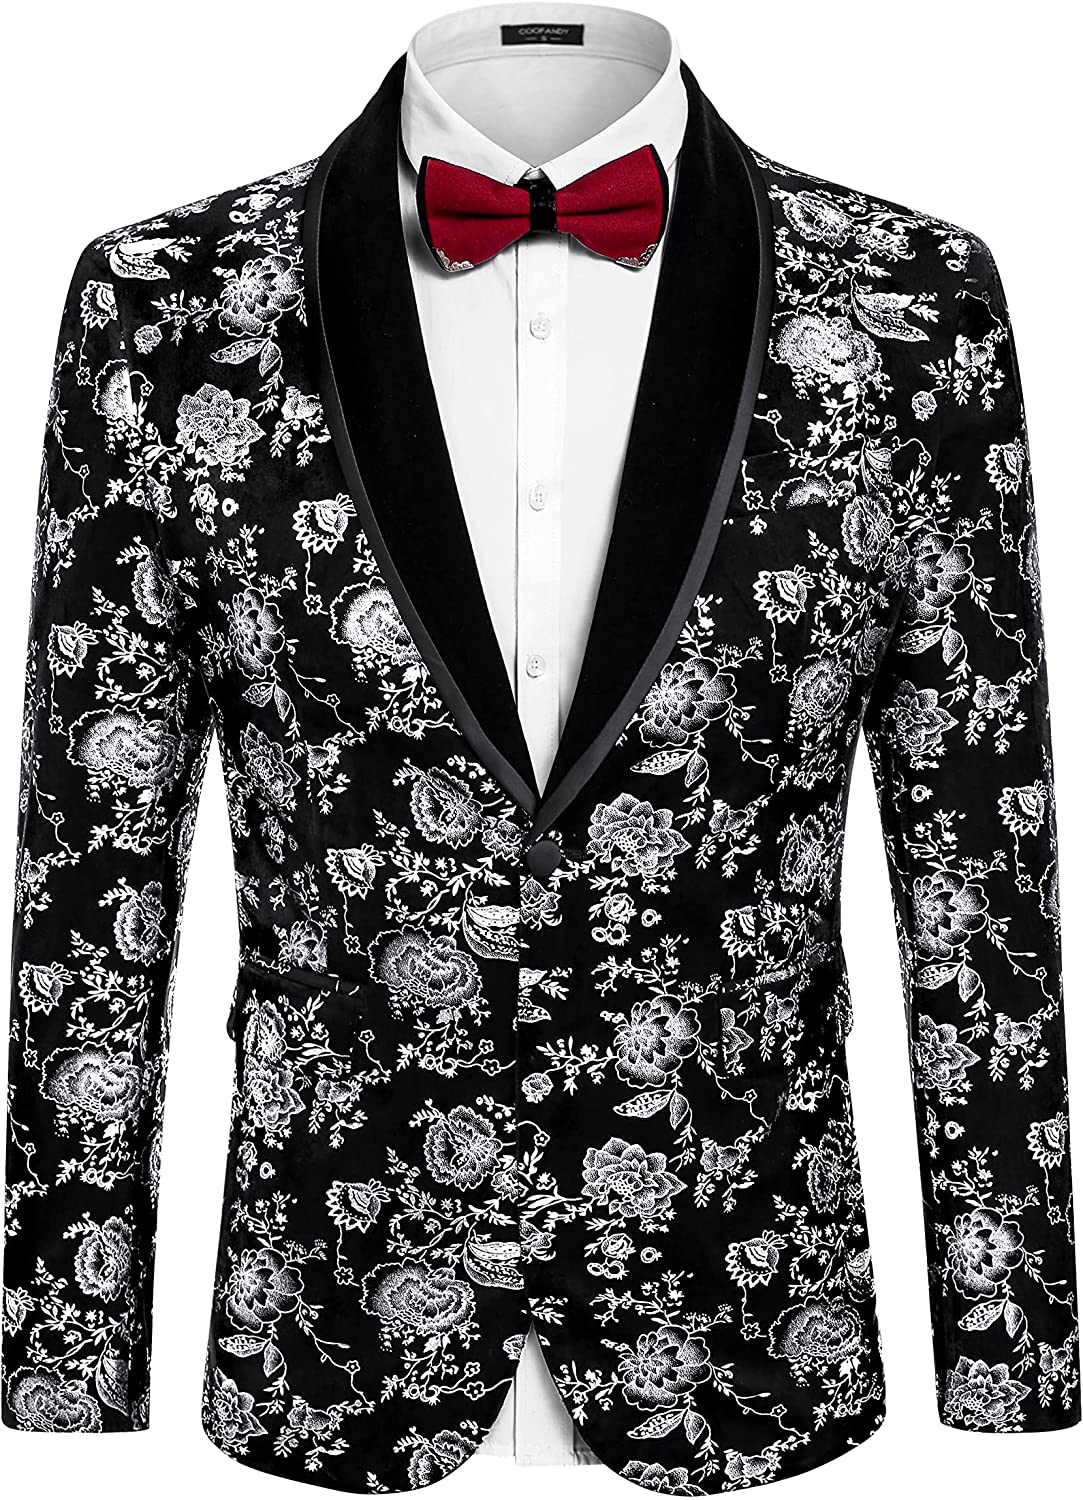 Pre-owned Visit The Coofandy Store Coofandy Men's Floral Tuxedo Jacket ...